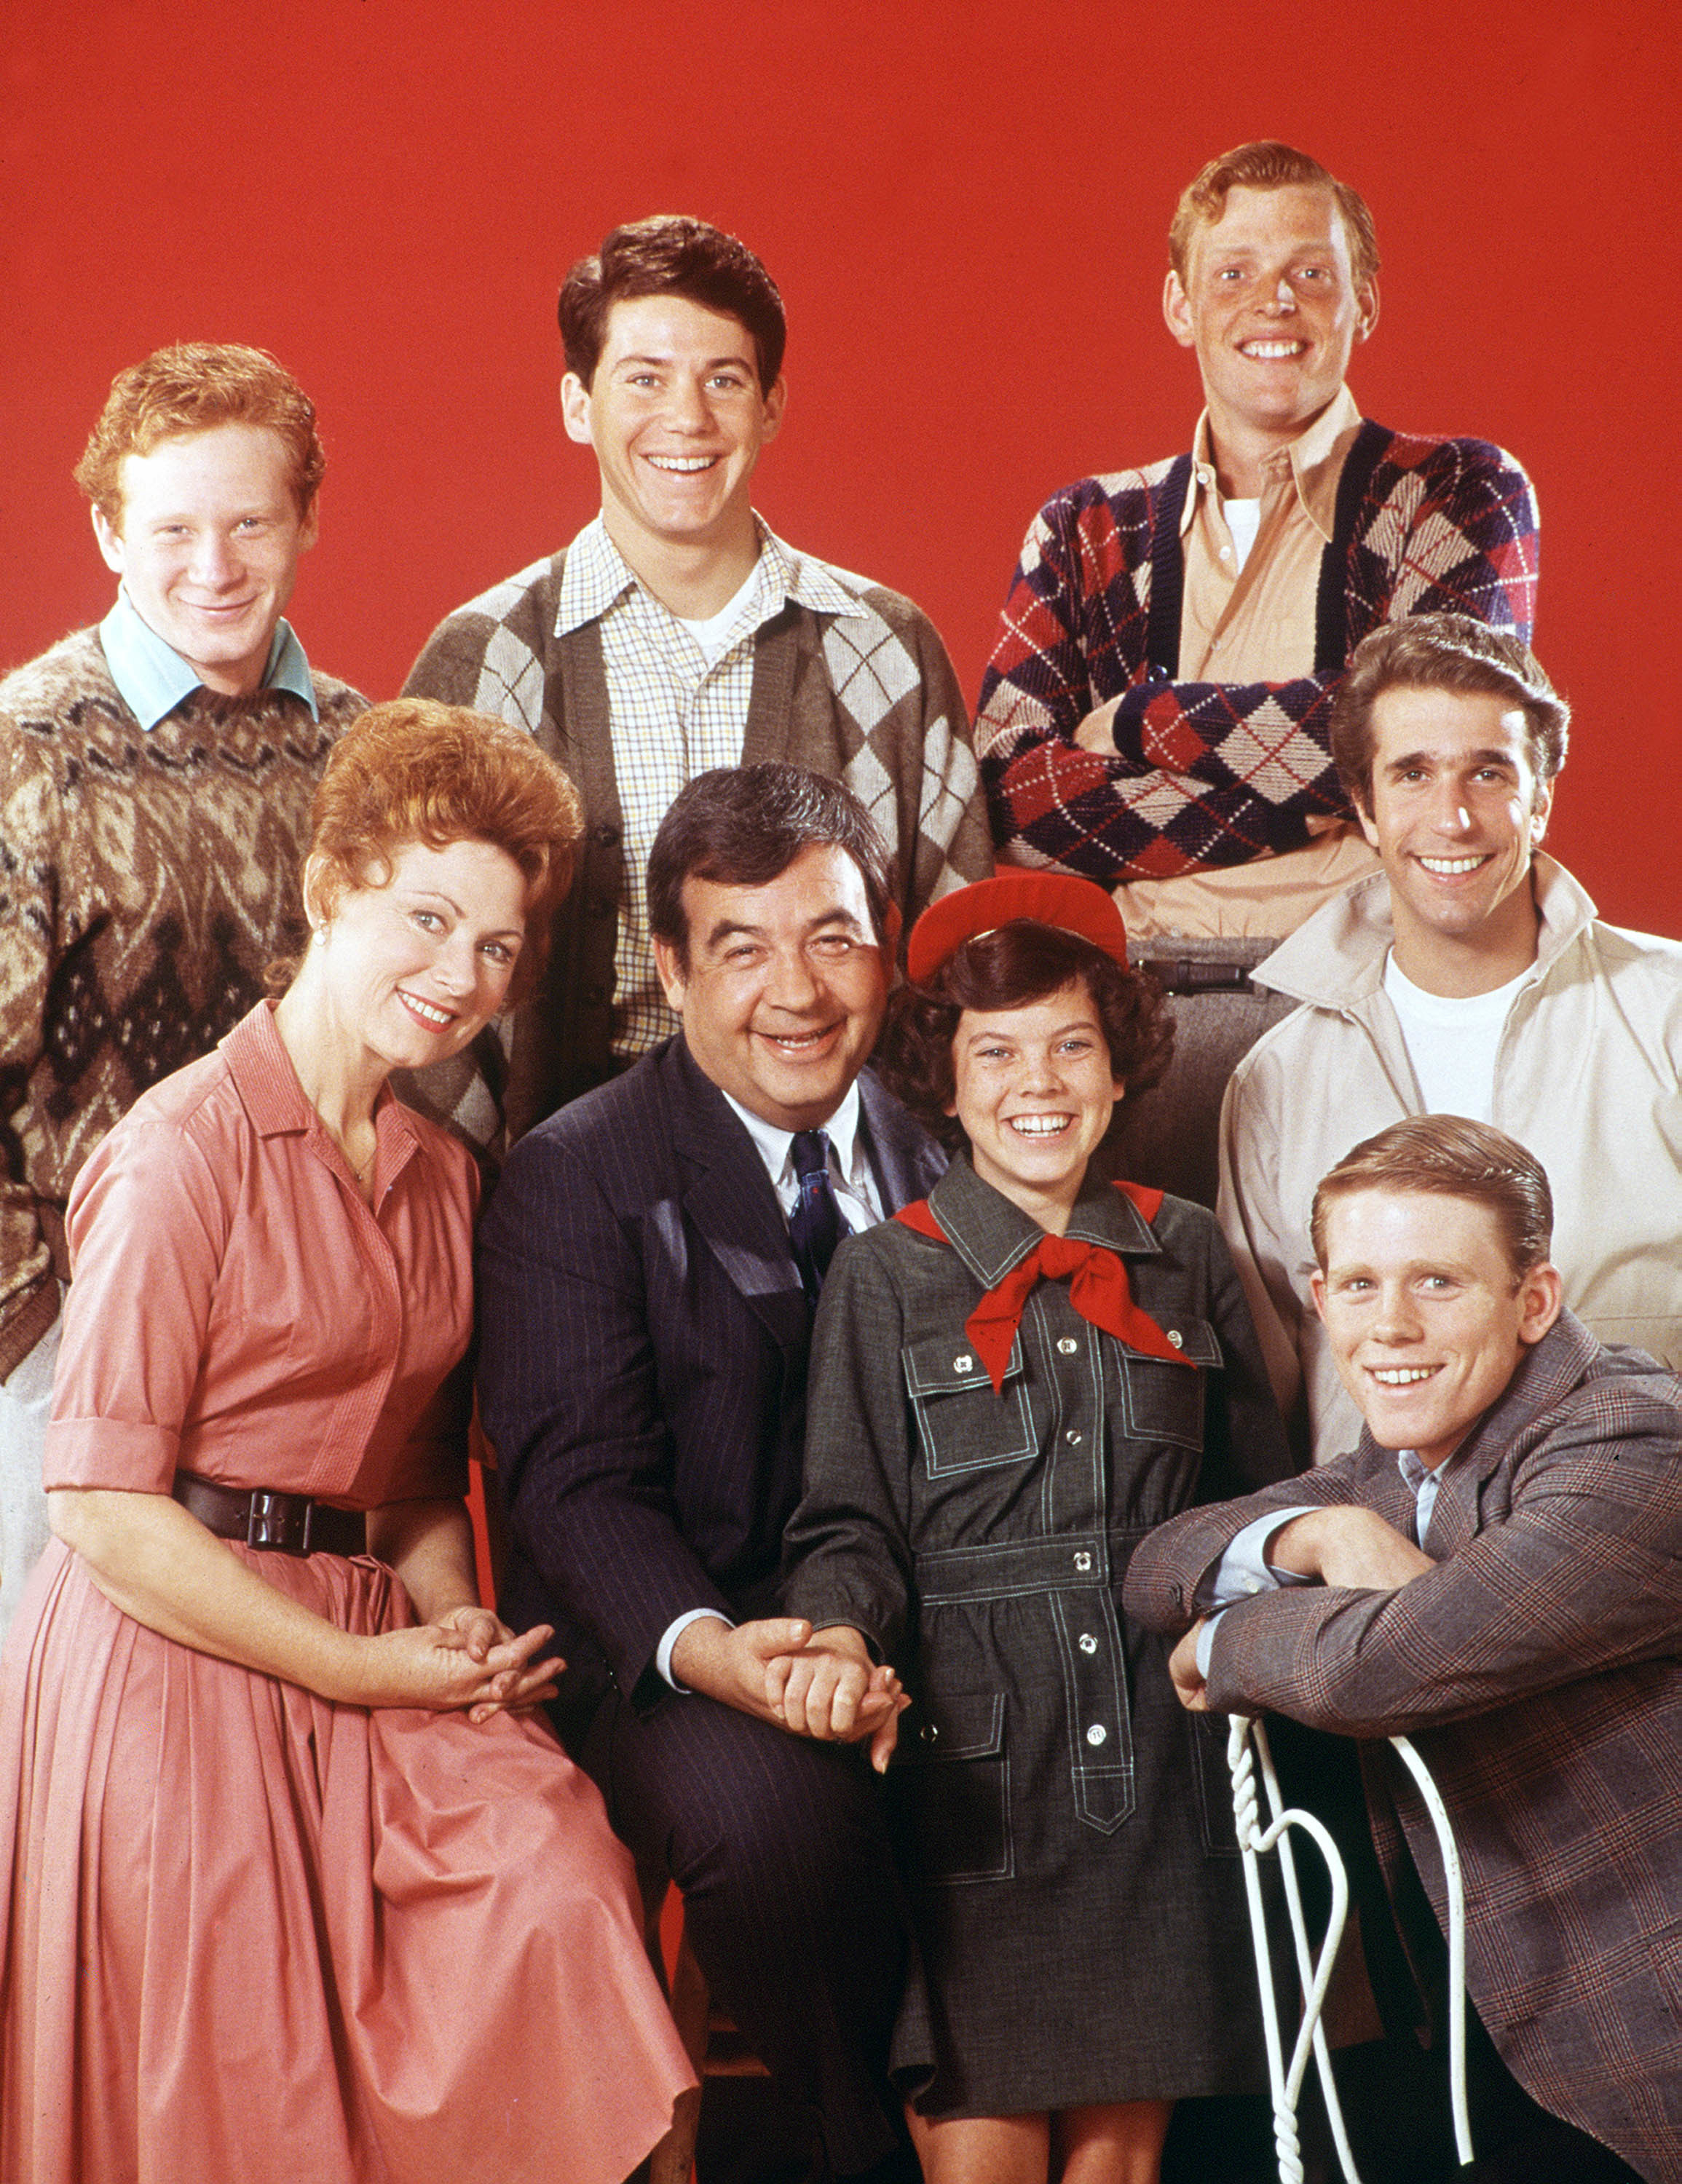 what where names on happy days